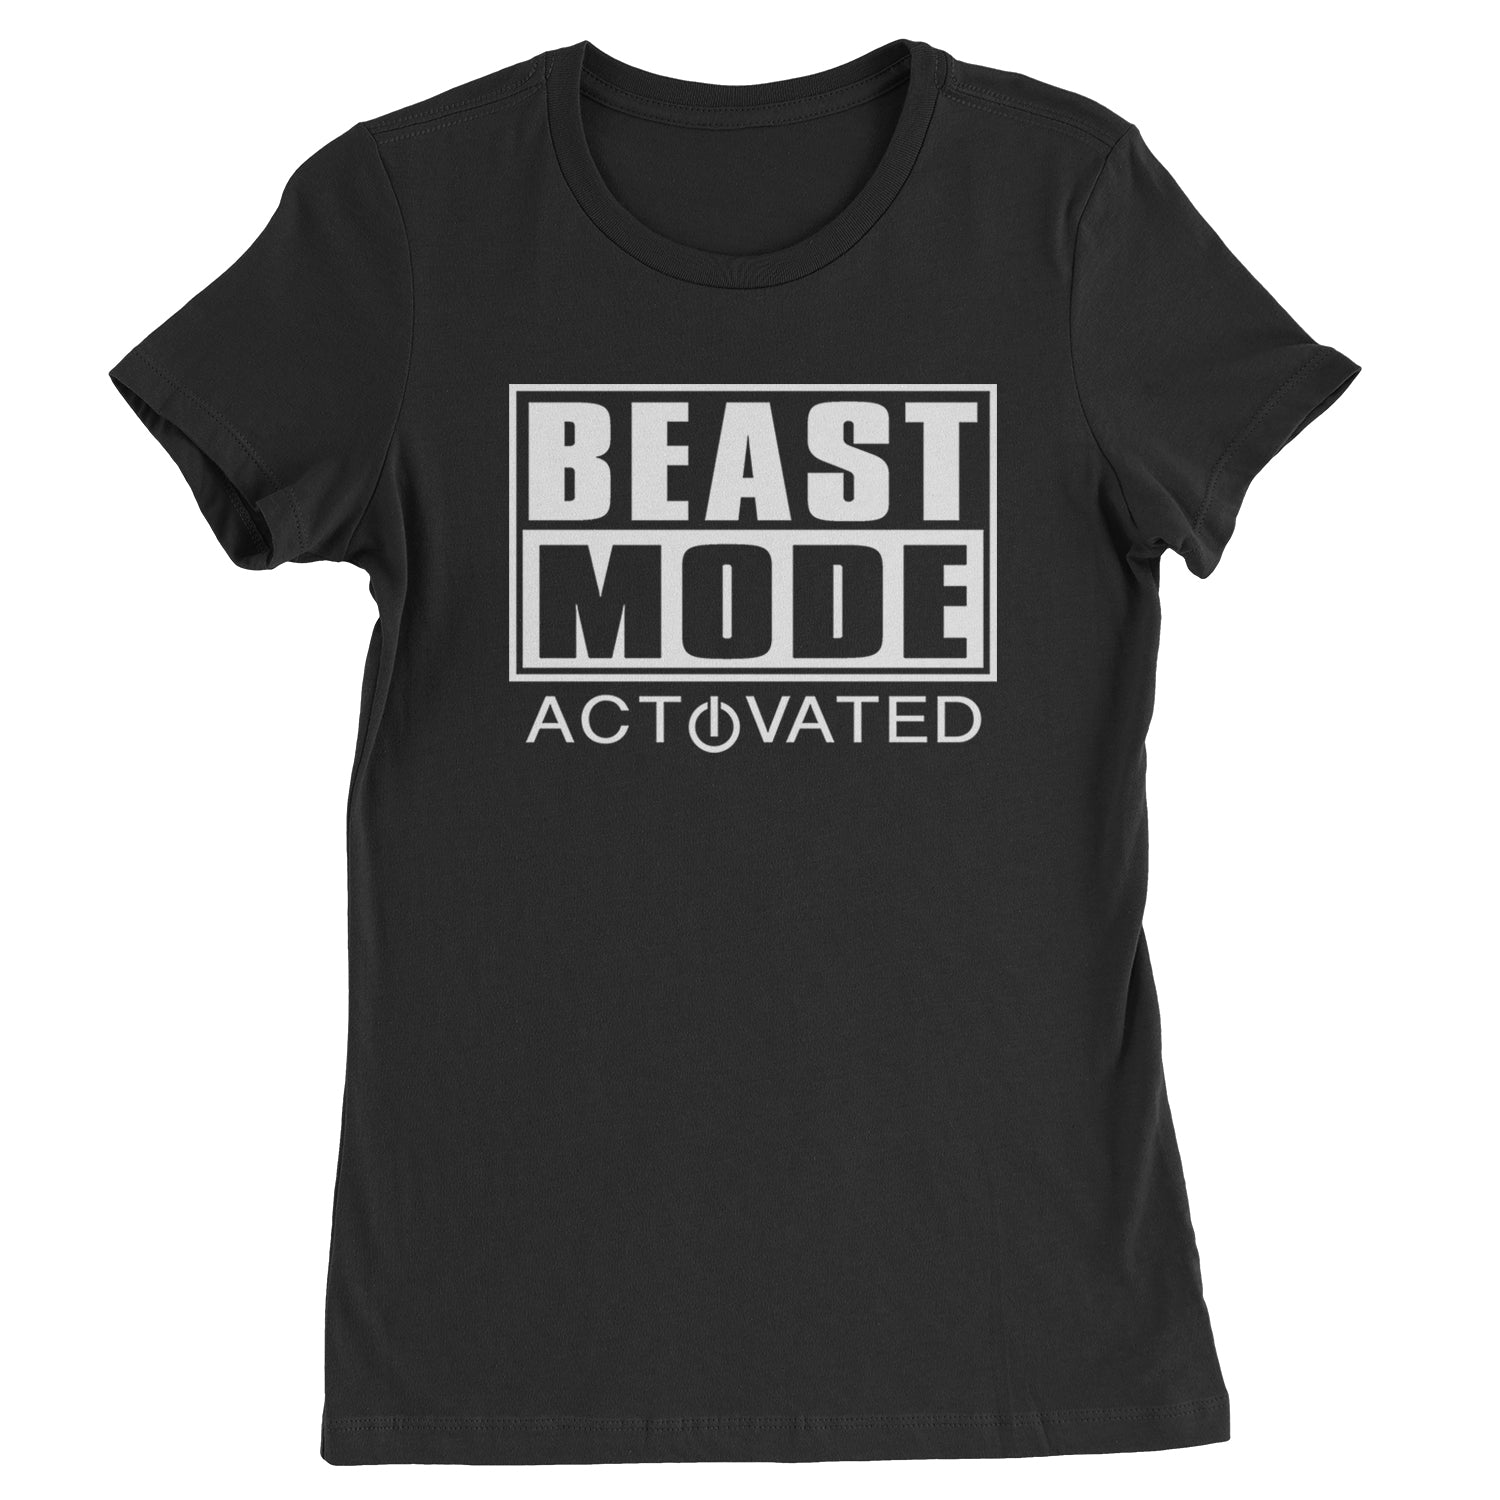 Activated Beast Mode Workout Gym Clothing Womens T-shirt